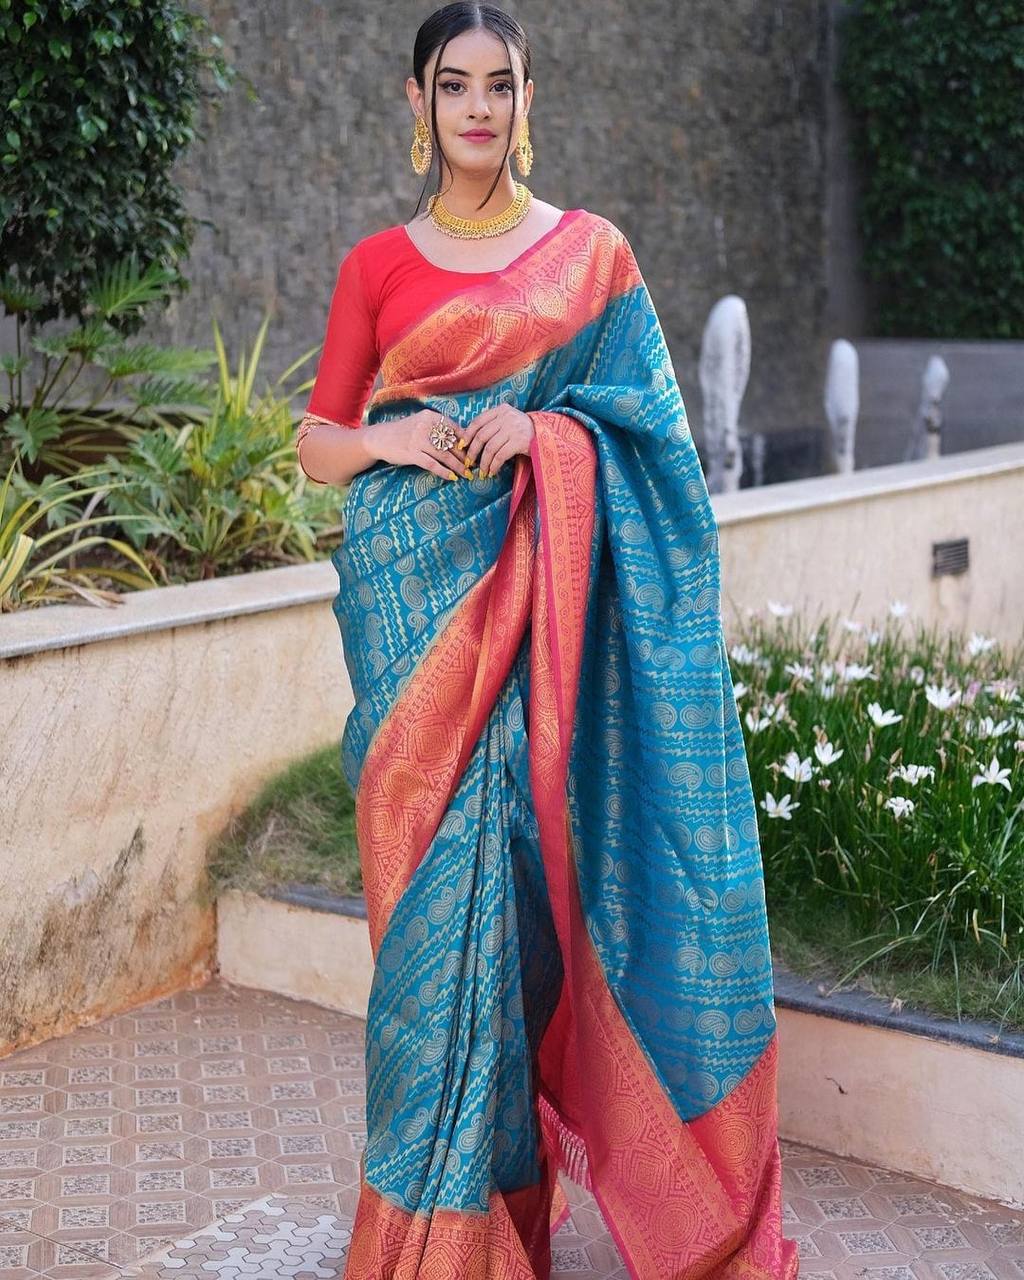 JACQUARD WORK ON ALL OVER THE SAREE